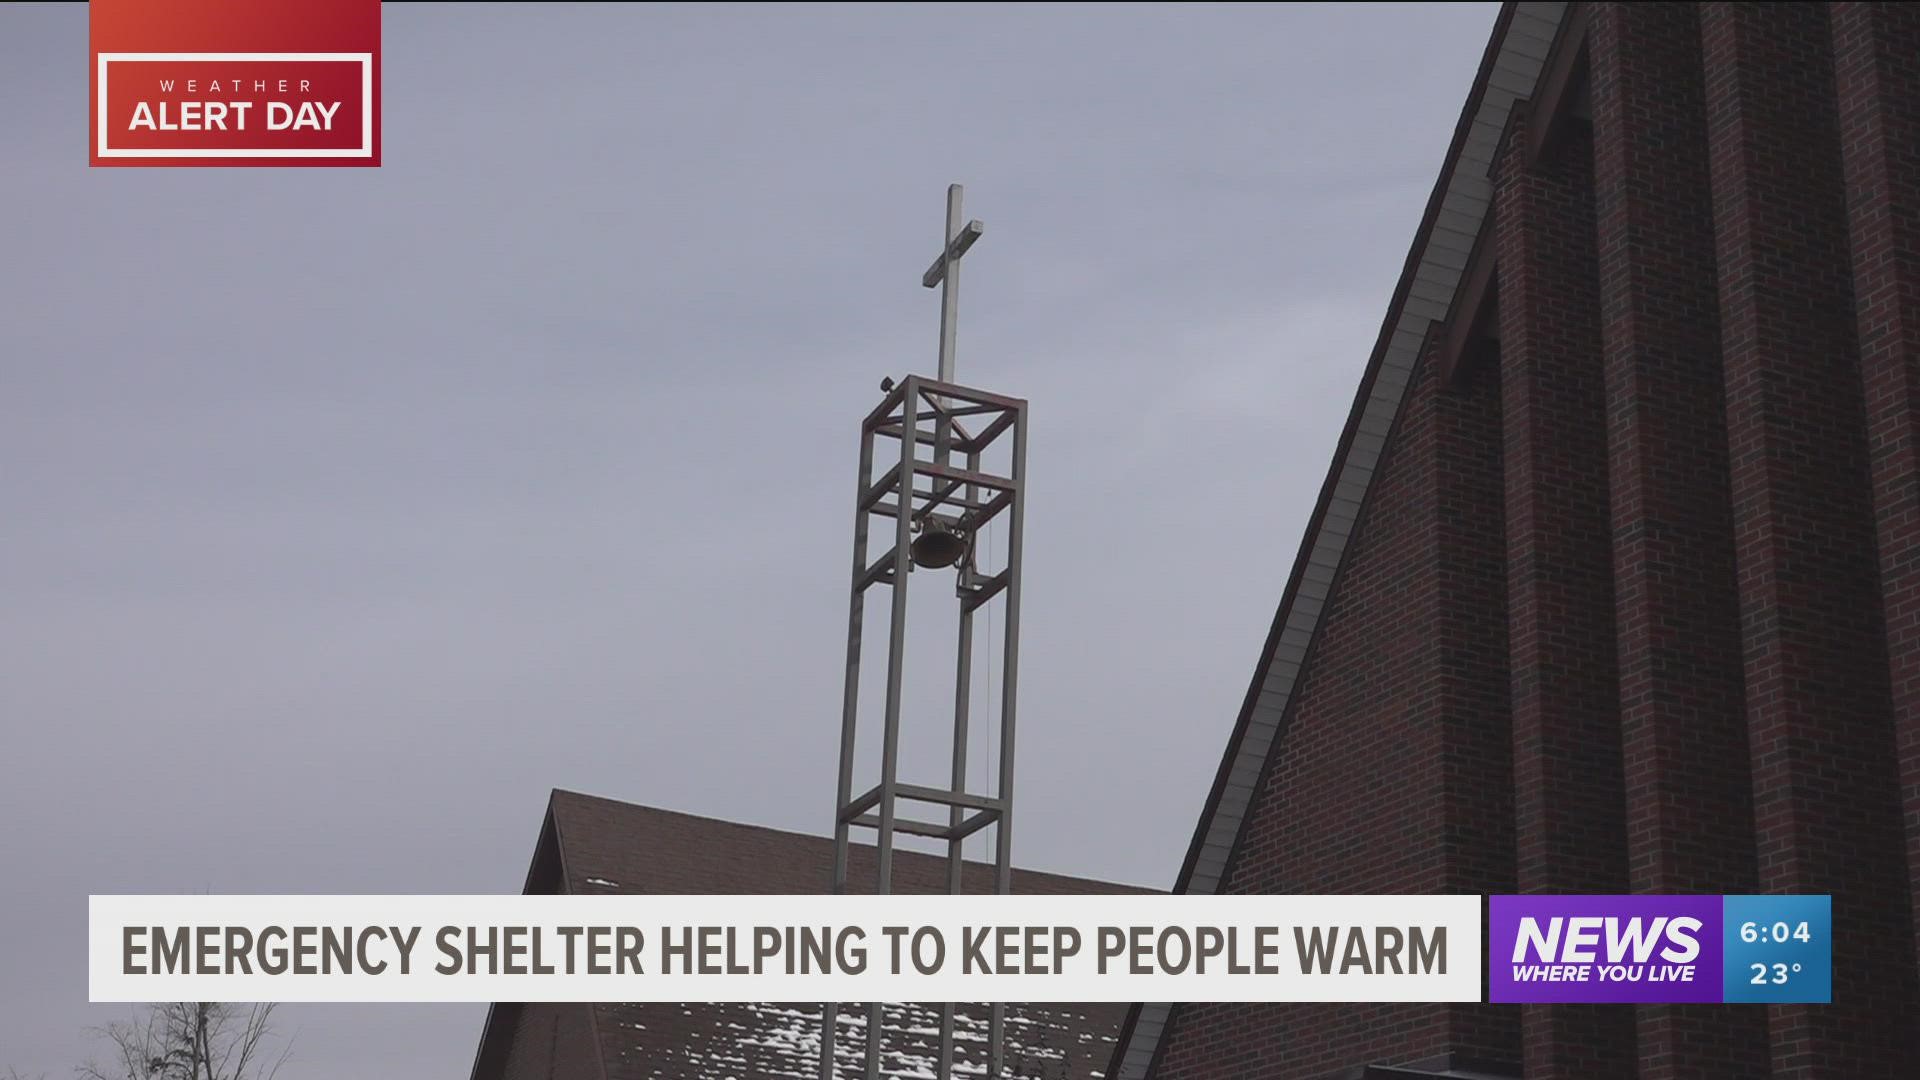 Fayetteville has opened a warming shelter to those in need as below-freezing temperatures hit our area.